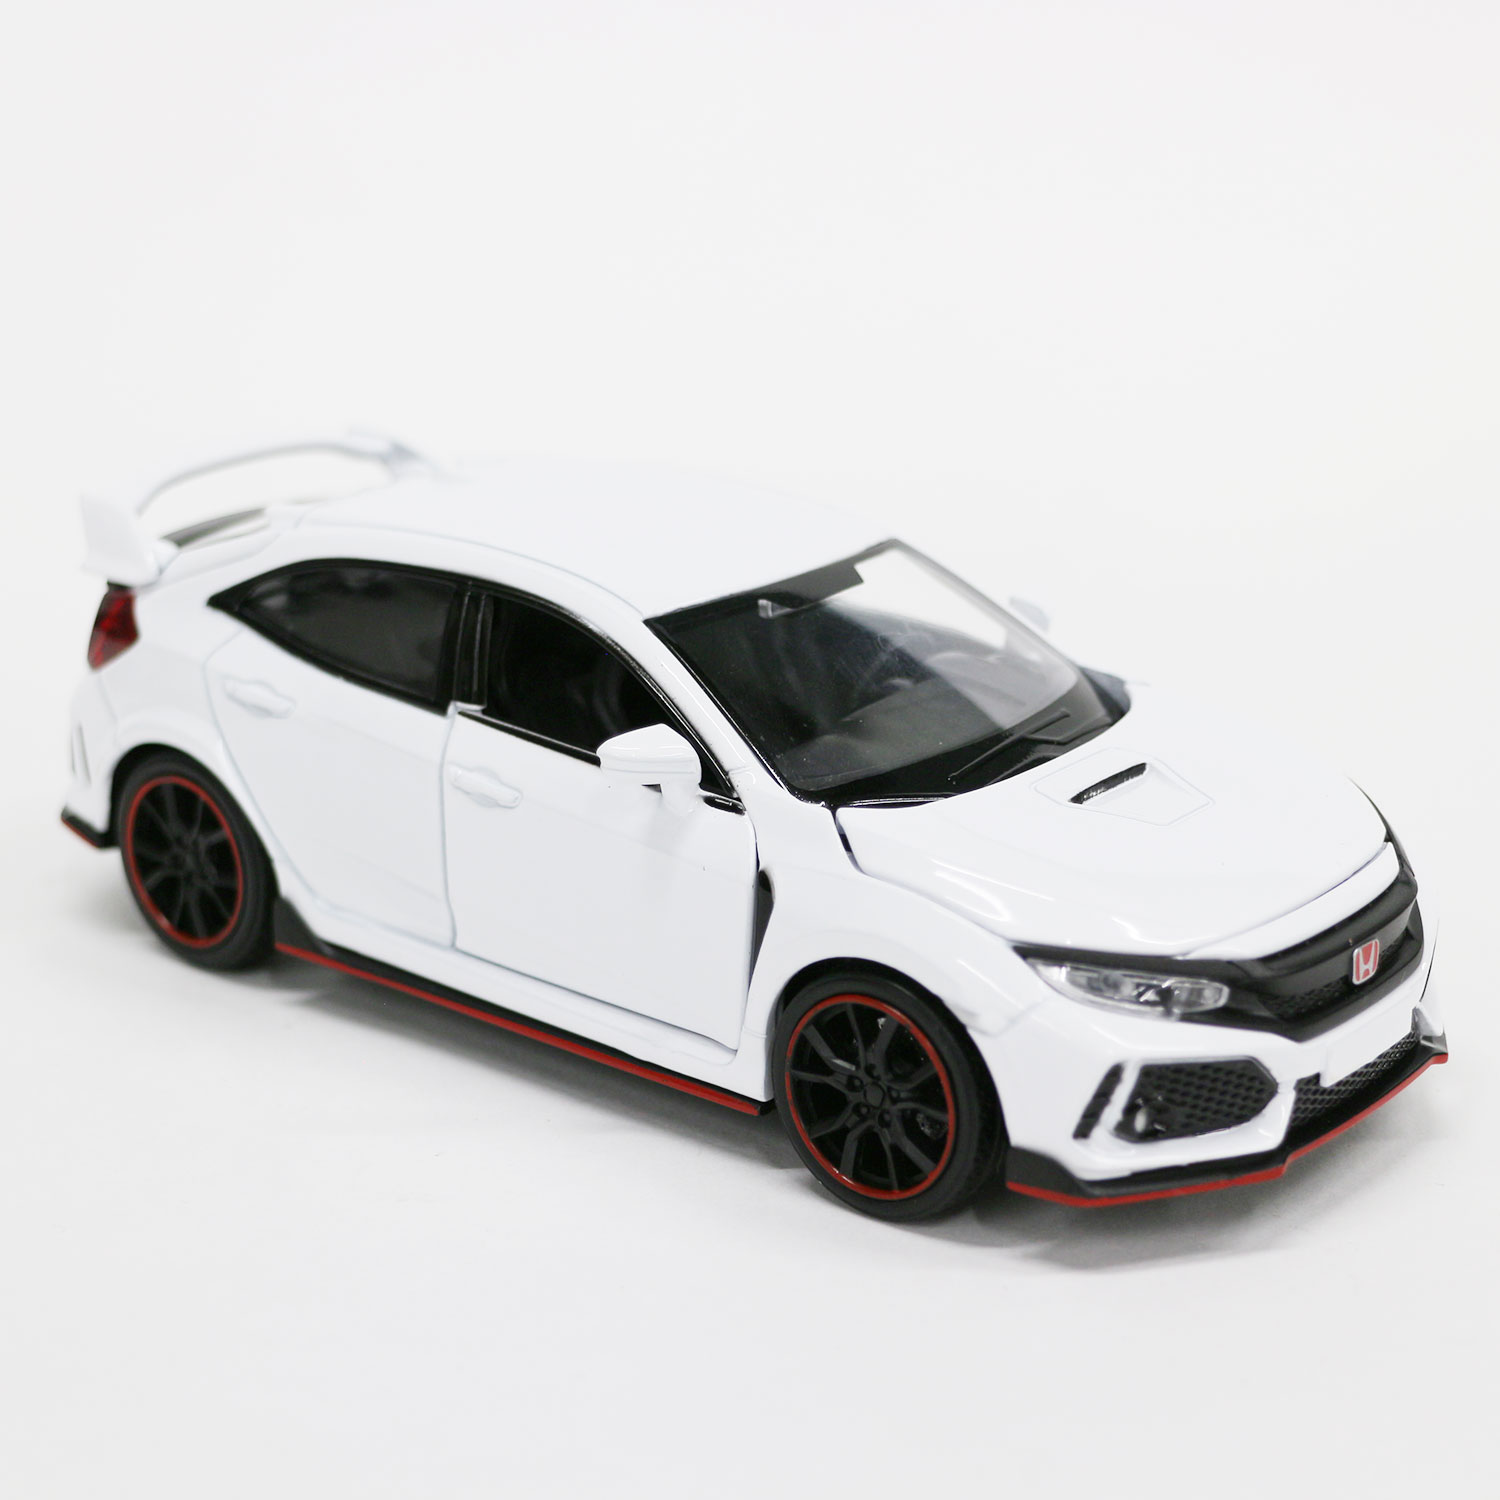 LXg[hCgTEhV[Y CIVIC TYPE R